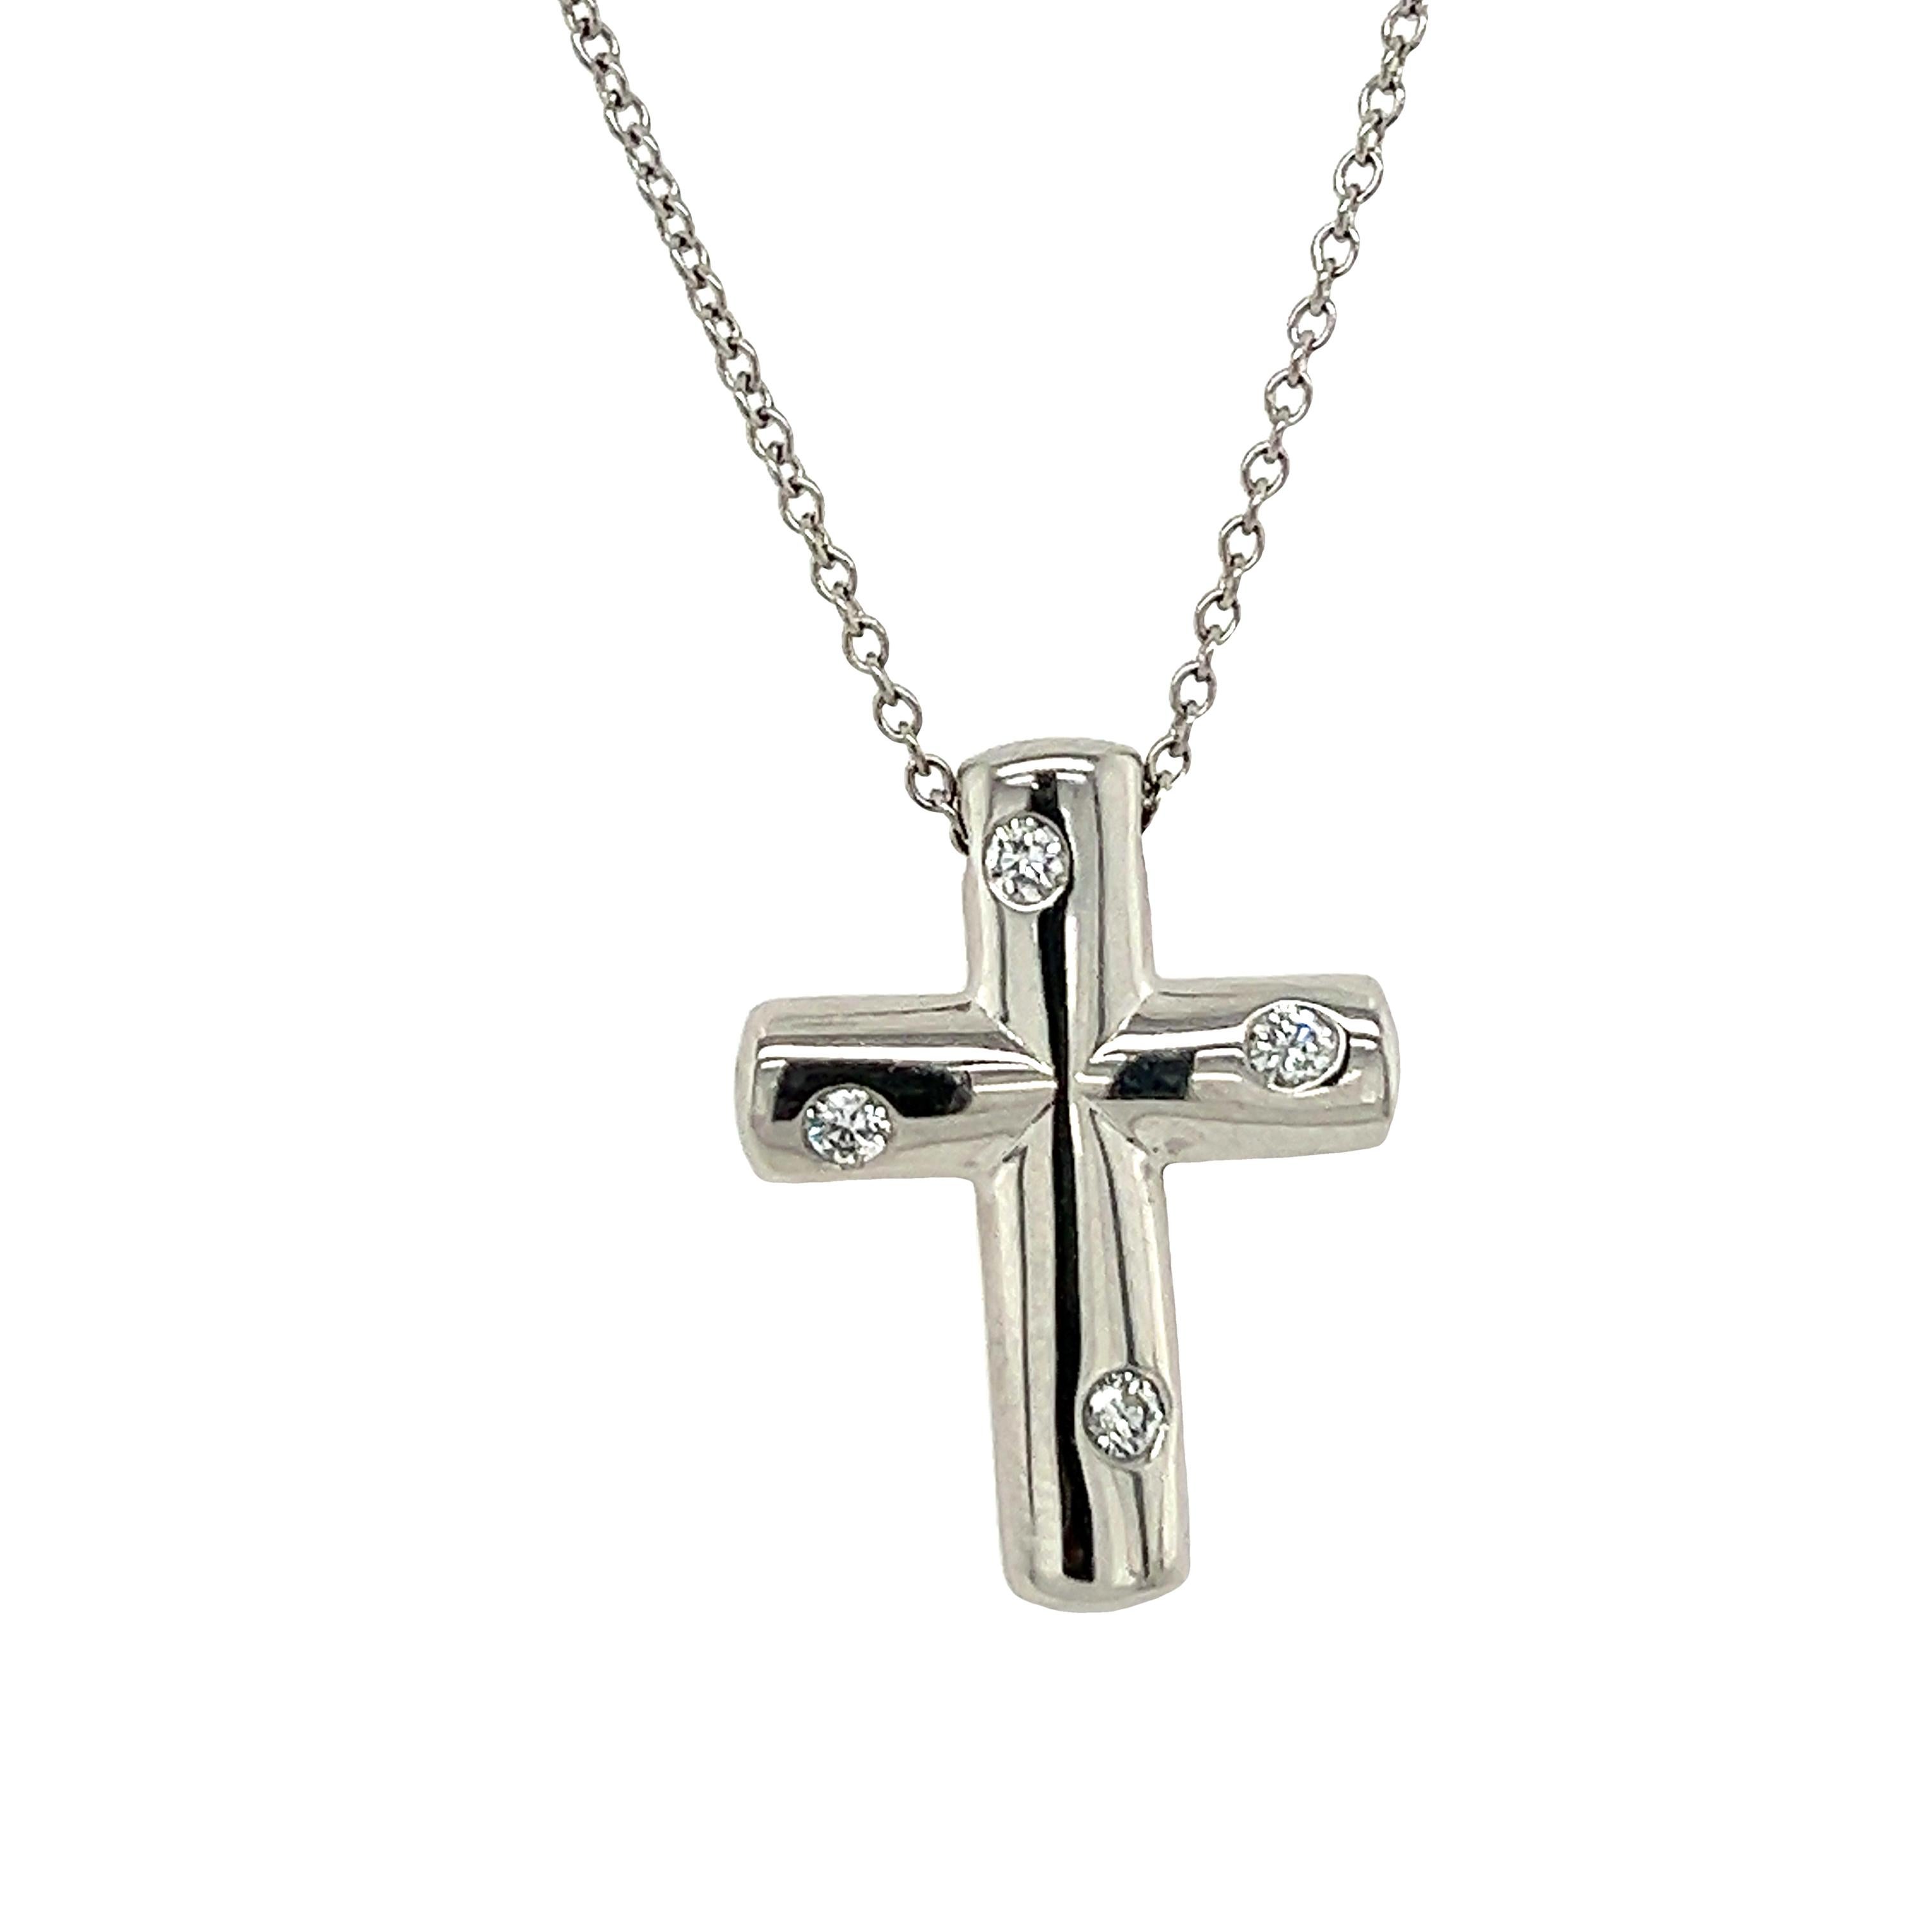 Tiffany & Co. Platinum Diamond Etoile Cross Pendant. Crafted from the finest platinum, this stunning pendant features a captivating cross design adorned with shimmering diamonds from Tiffany's iconic Etoile collection. Paired with a 16-inch platinum